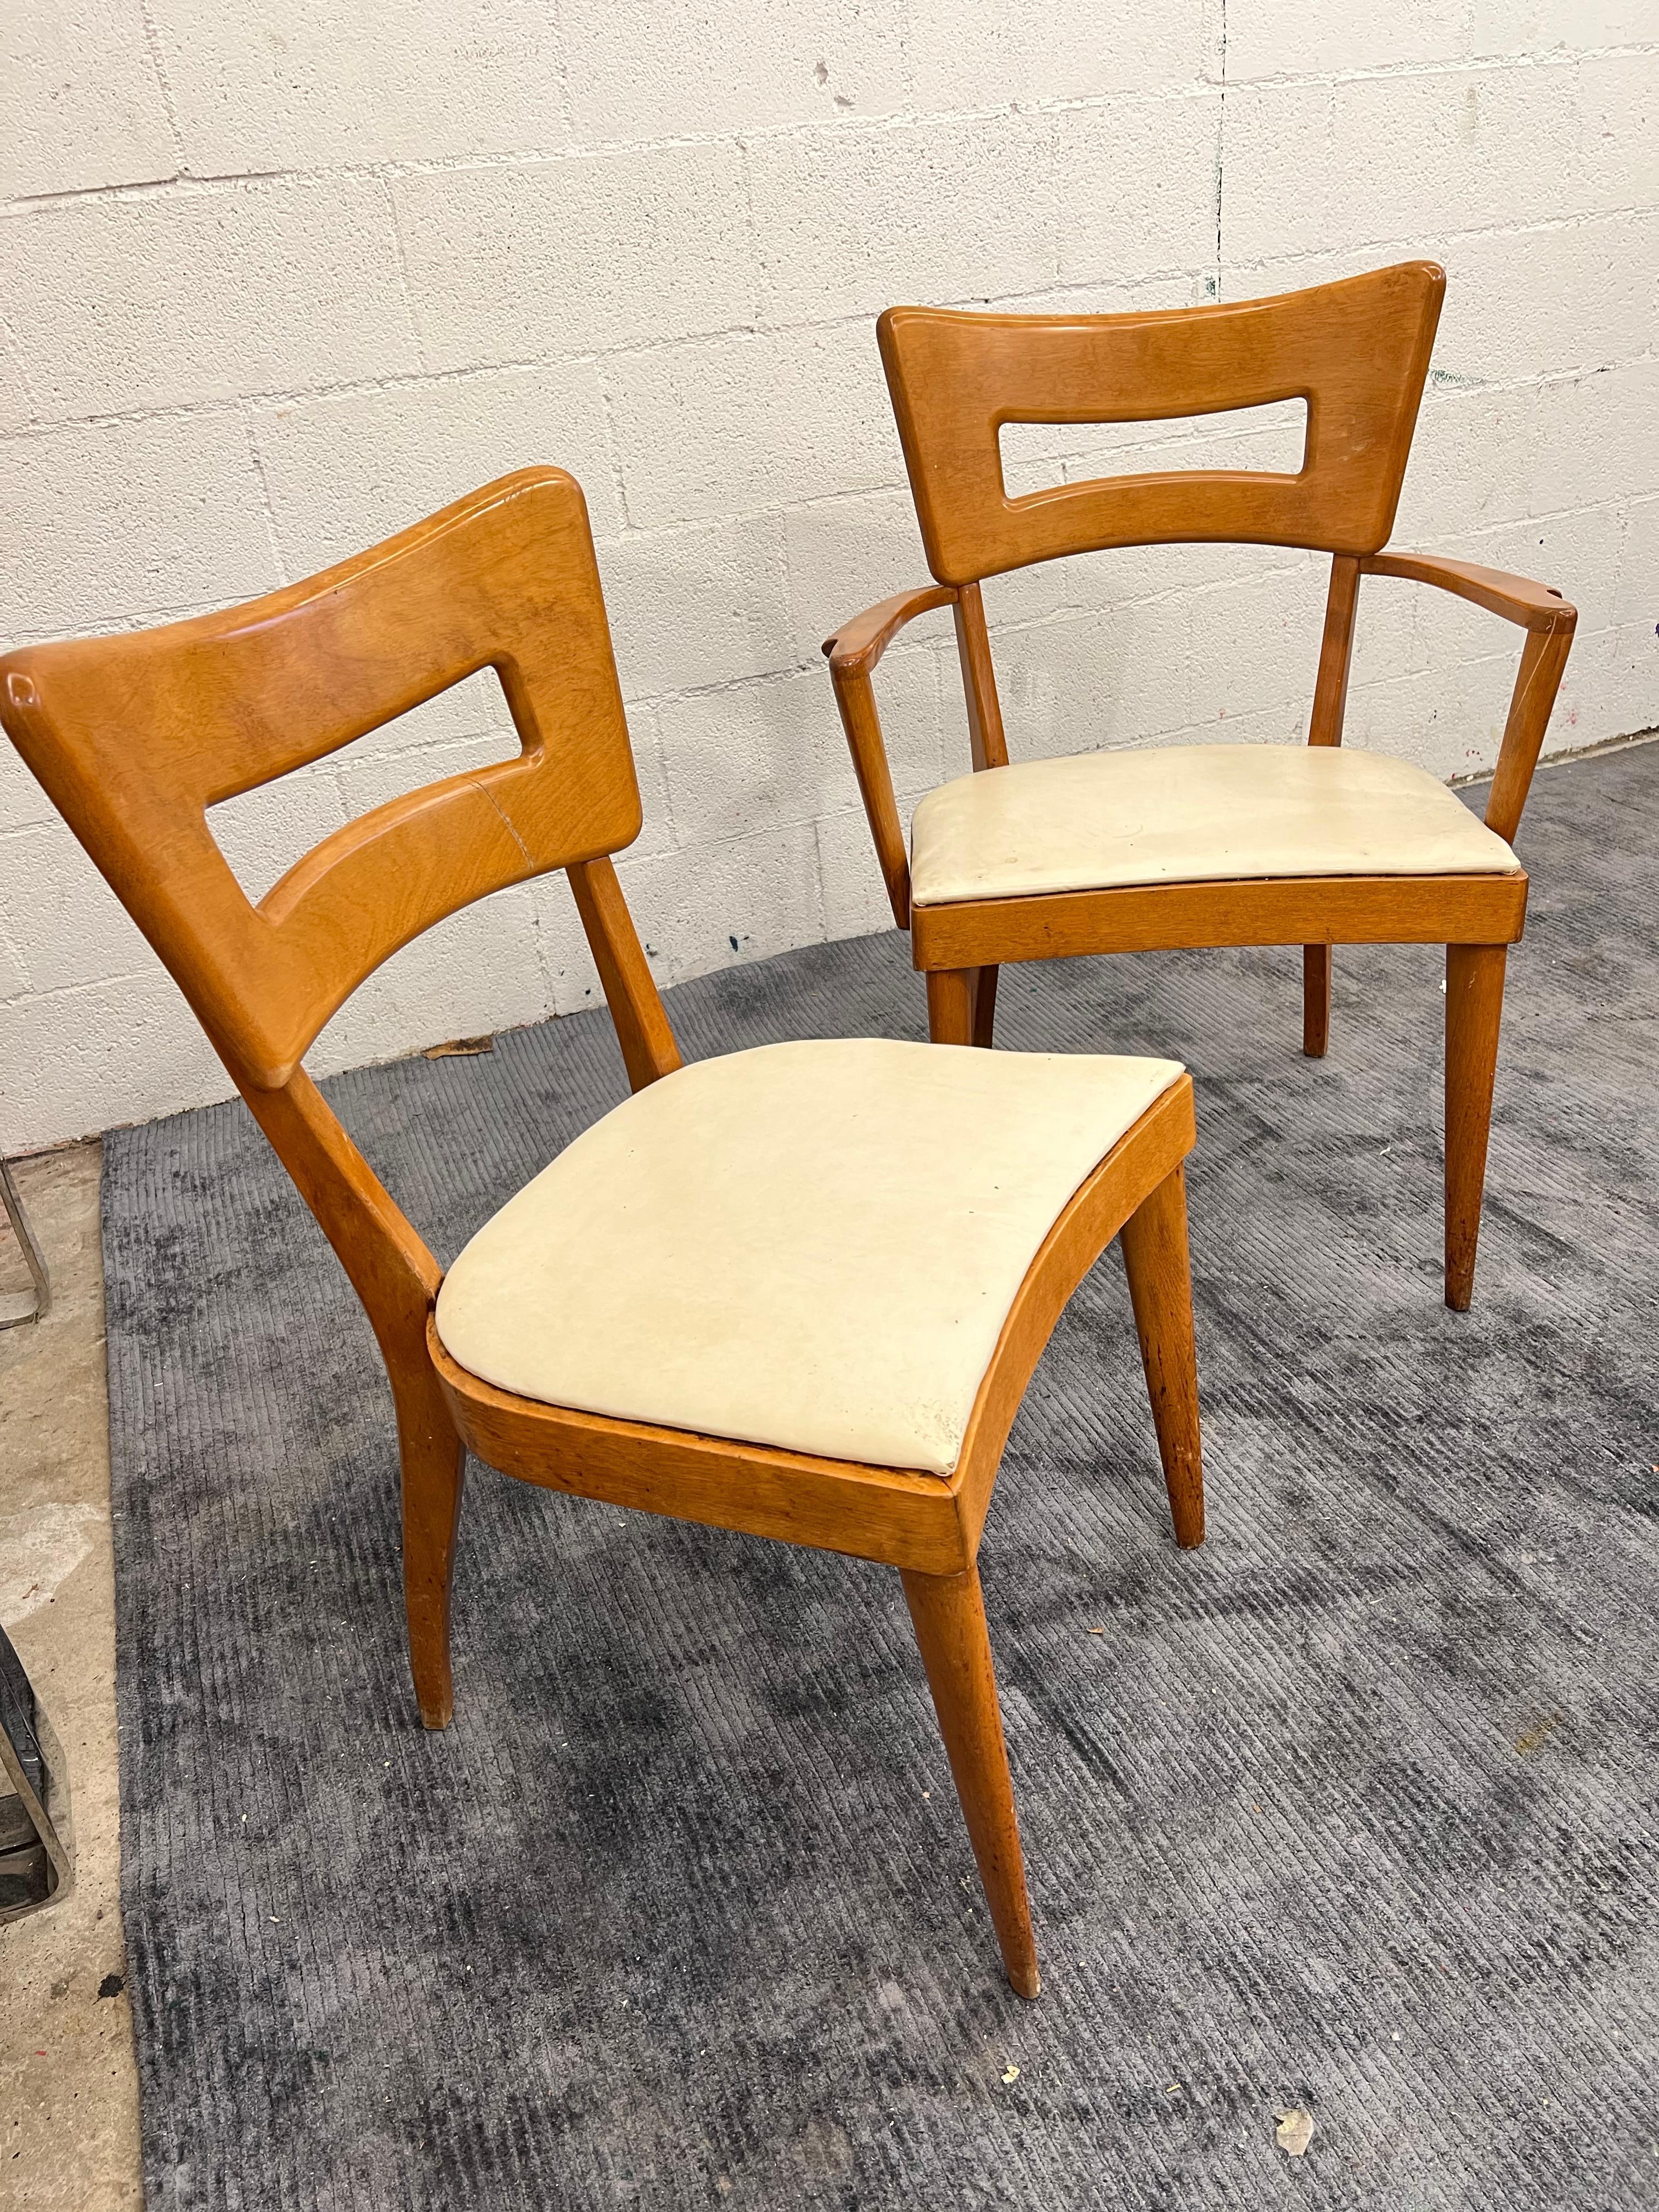 Mid-20th Century 1960s Set of 4 Heywood Wakefield Dog bone Dining Chair For Sale